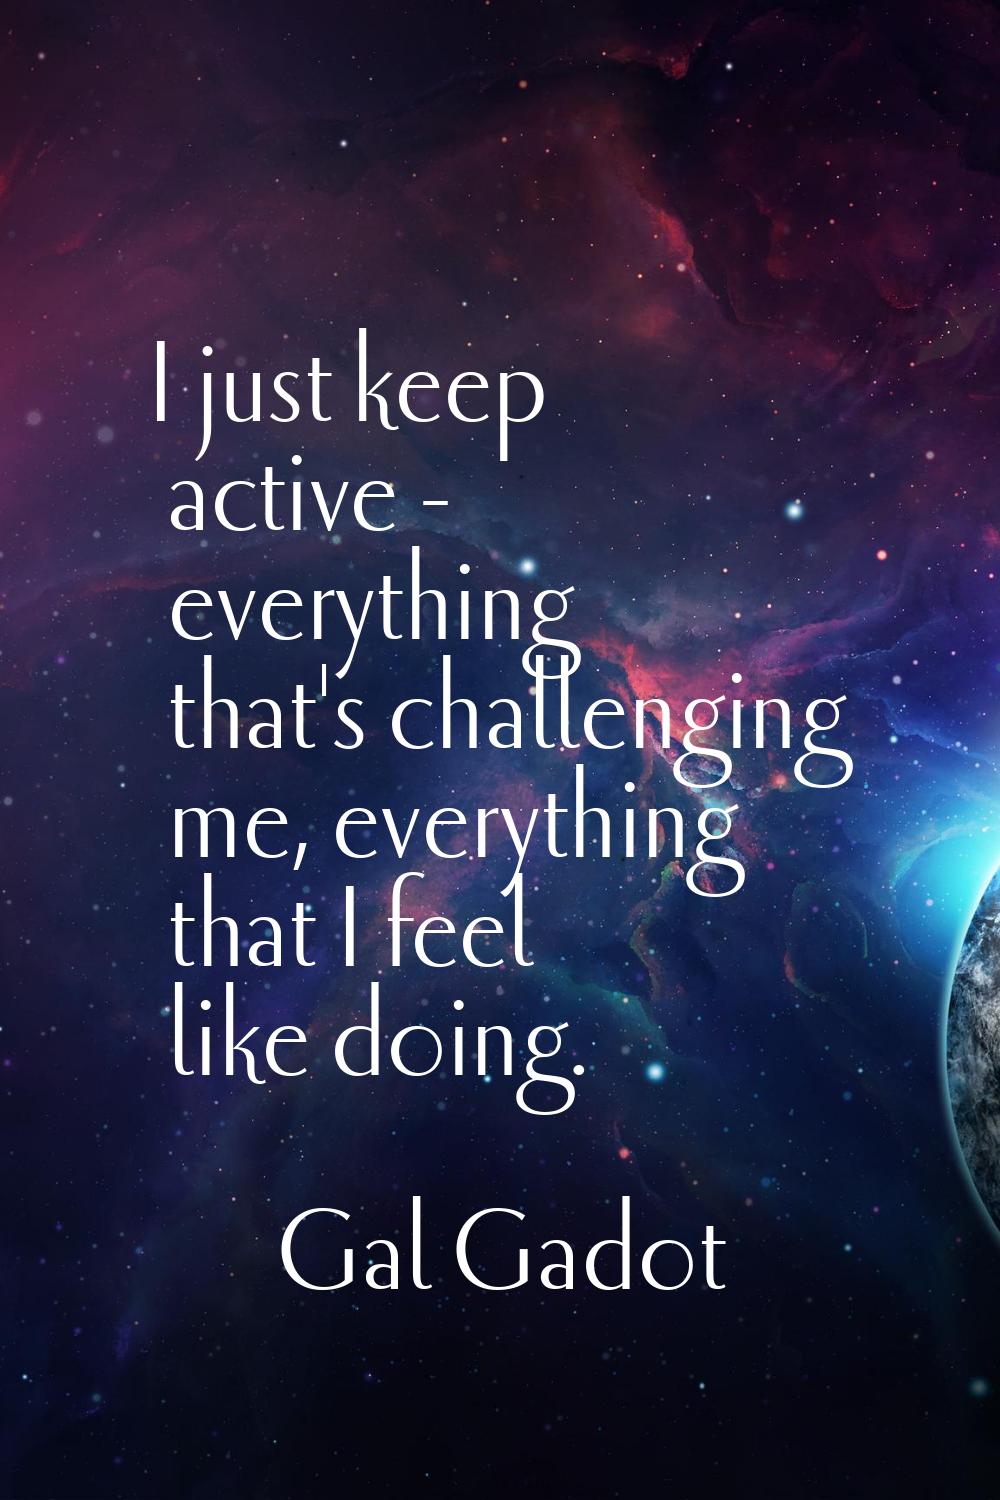 I just keep active - everything that's challenging me, everything that I feel like doing.